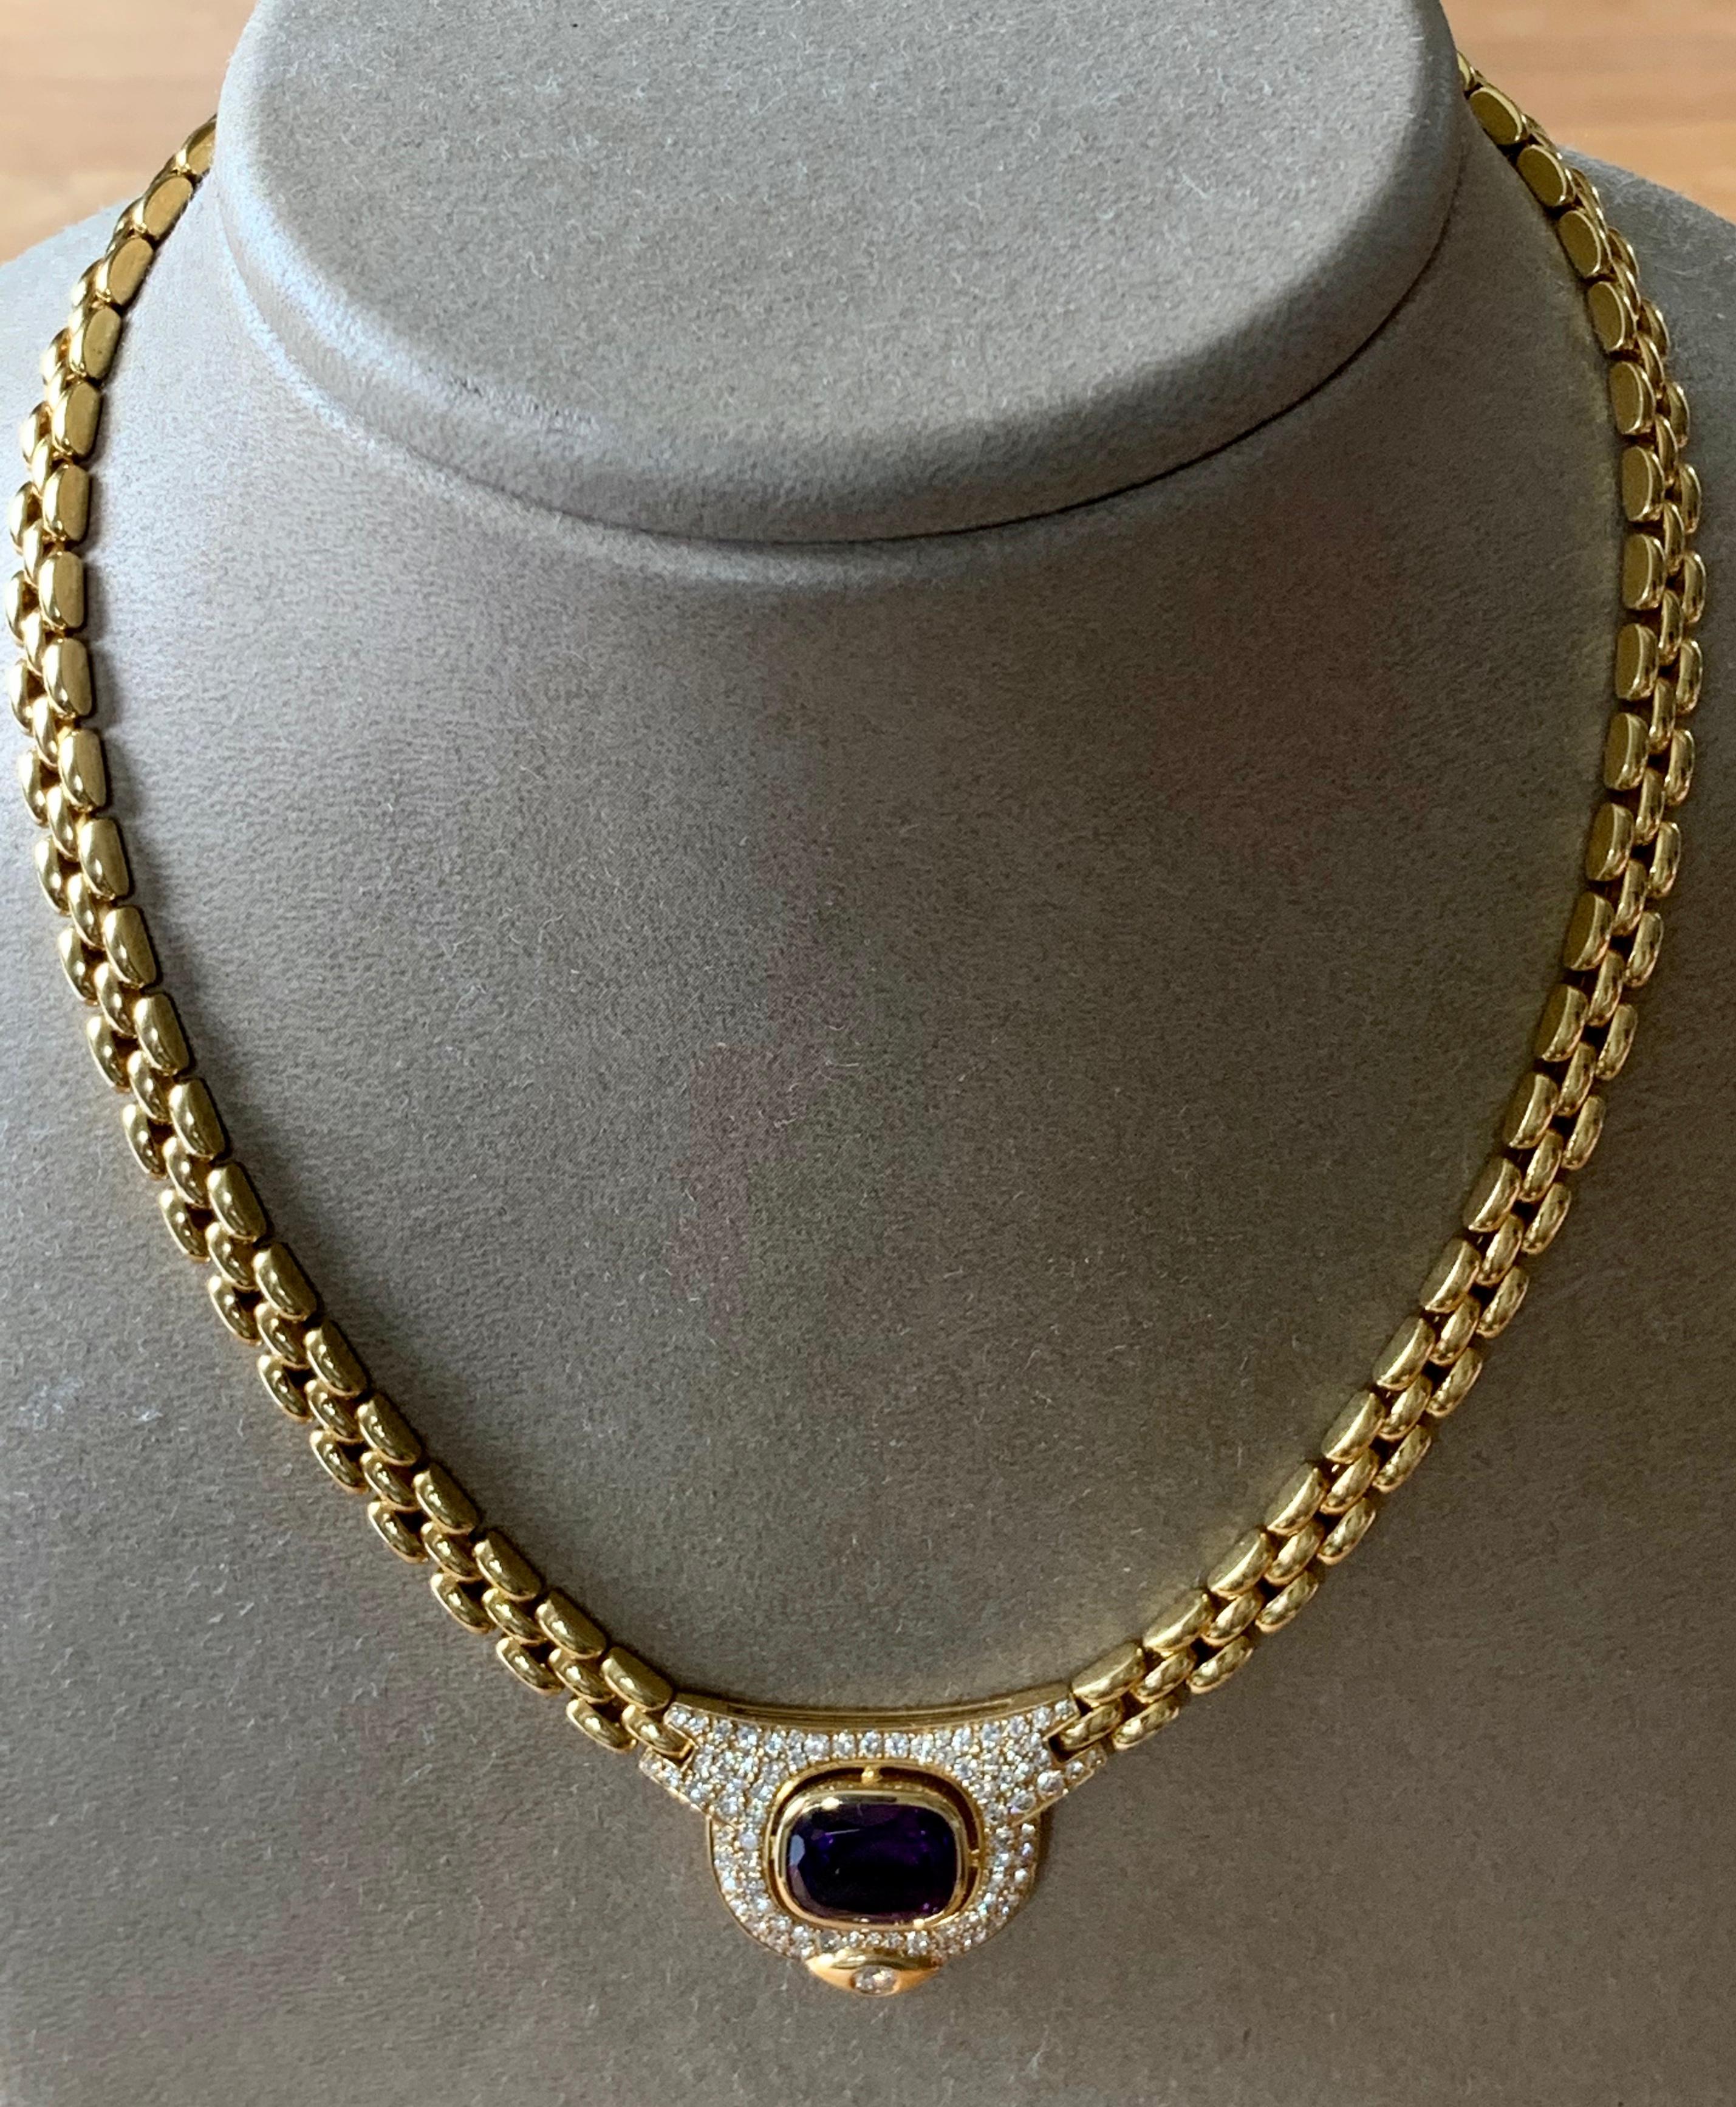 Contemporary Vintage 18 K Gold Link Chain Necklace with Amethyst and Diamonds by Kurz Zurich